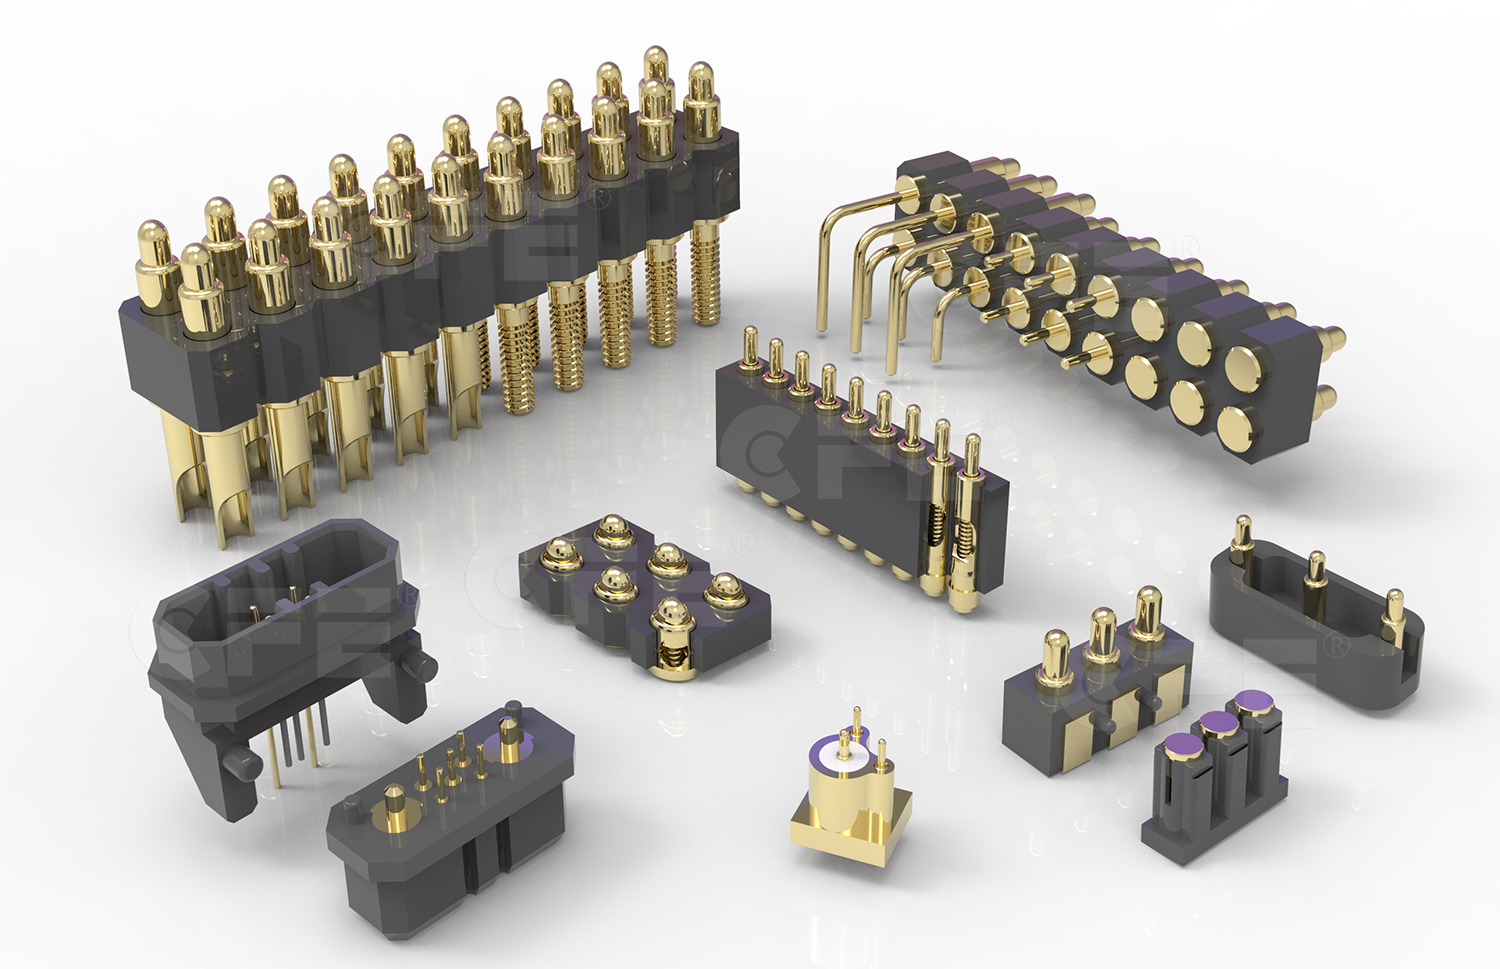 Different Types of Pin Connectors